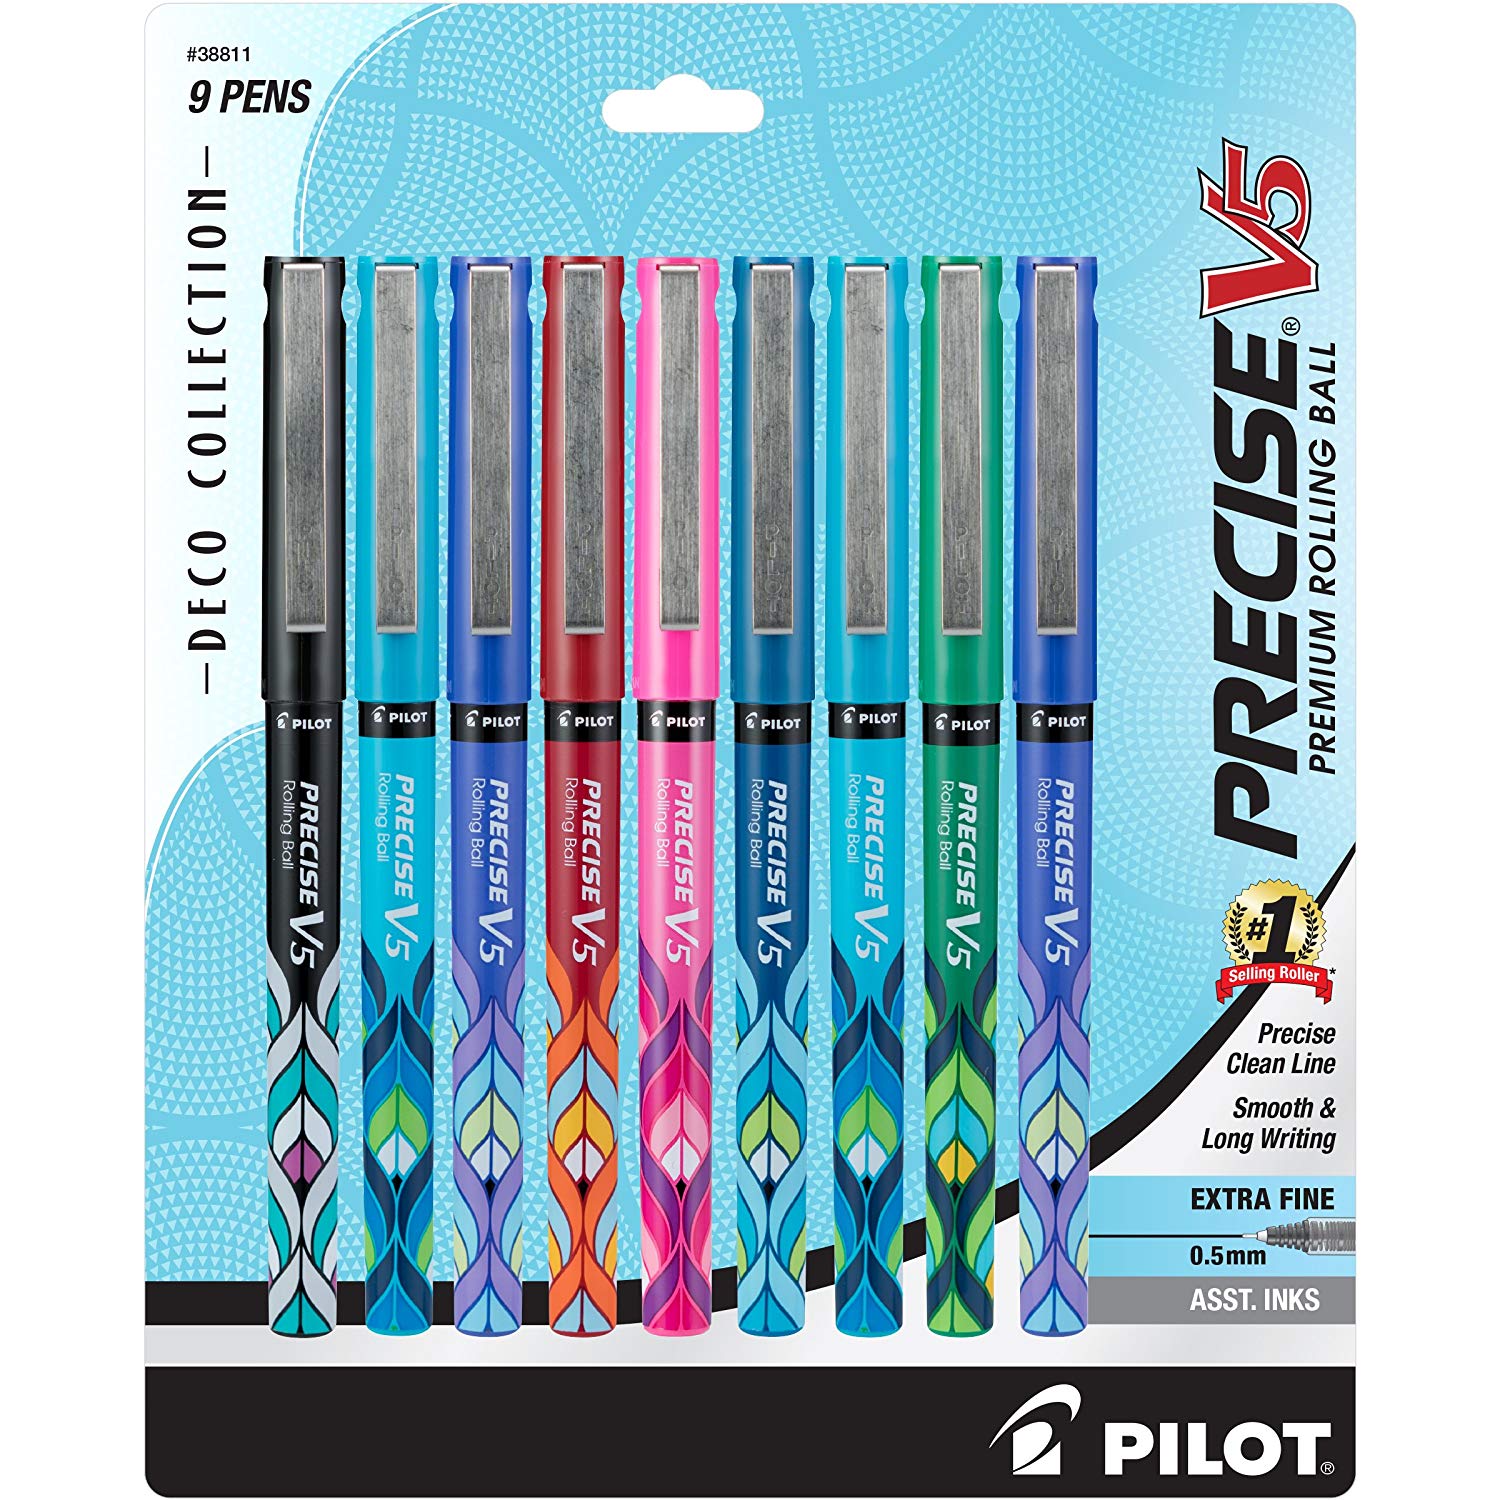 Pilot 38811 Precise V5 Deco Collection Rolling Ball Pens, 0.5mm Extra Fine Point, 9-Pack Assorted Colors